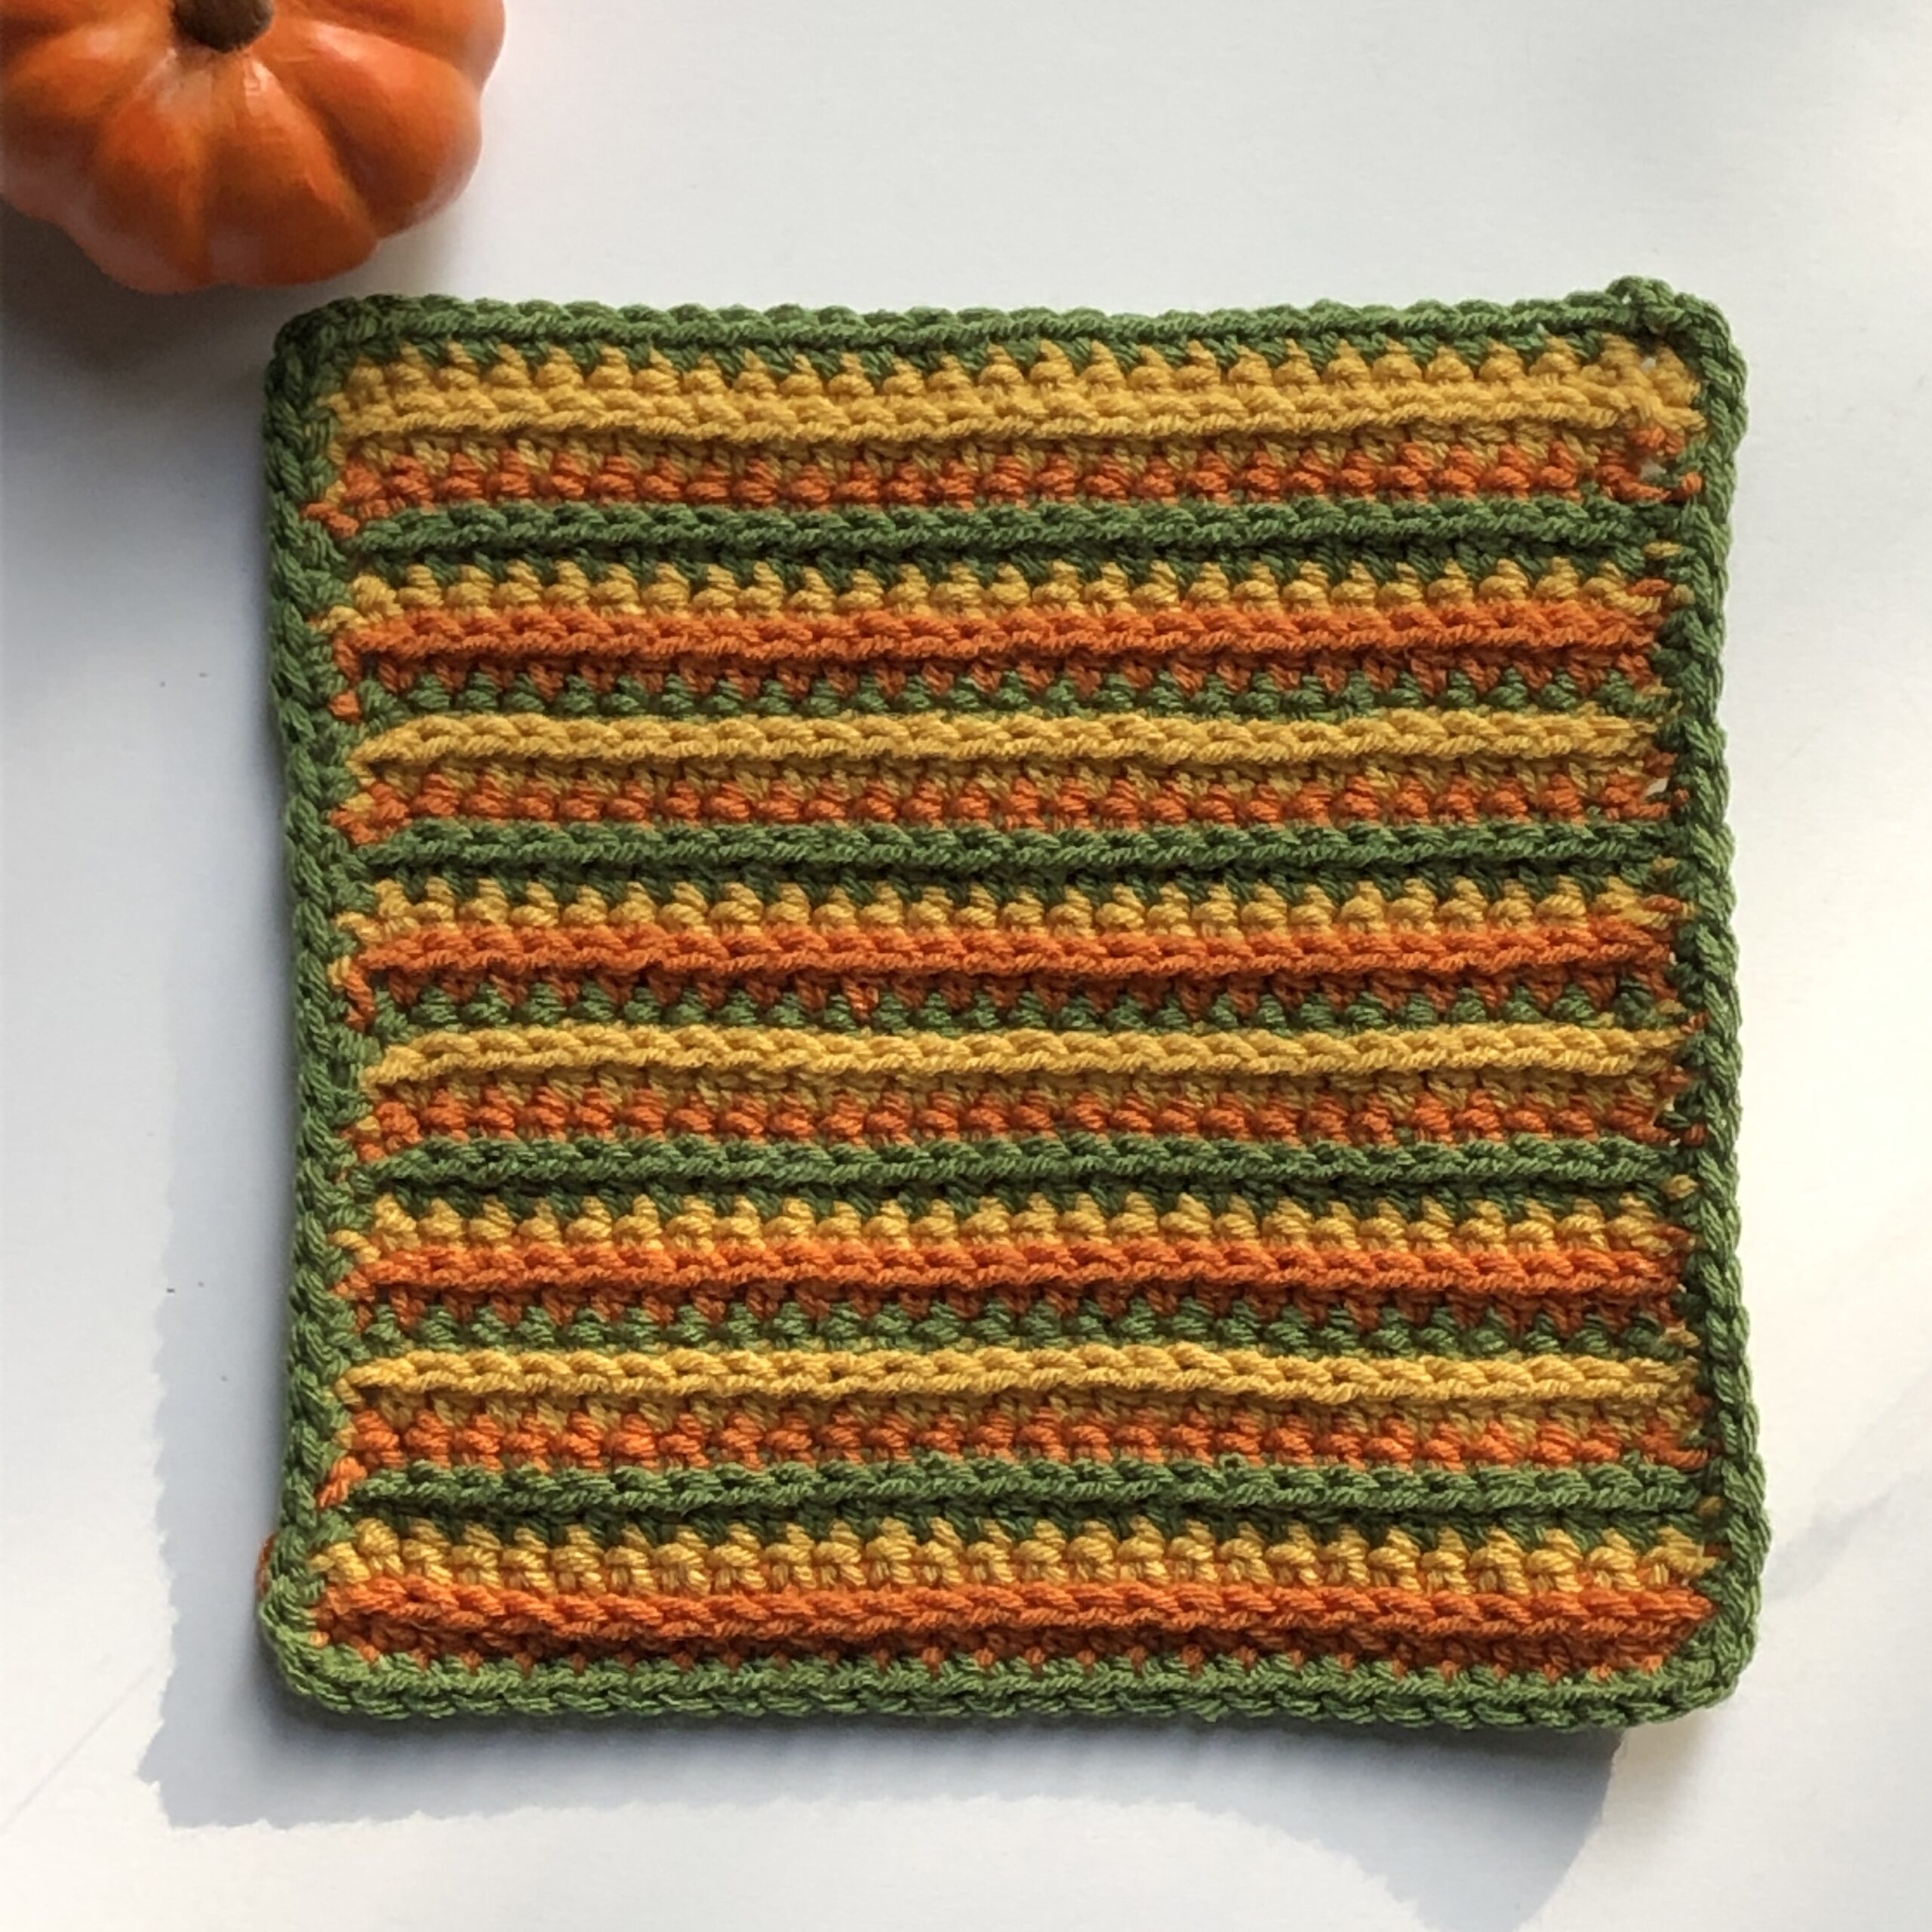 crocheted square with green, orange, and mustard stripes